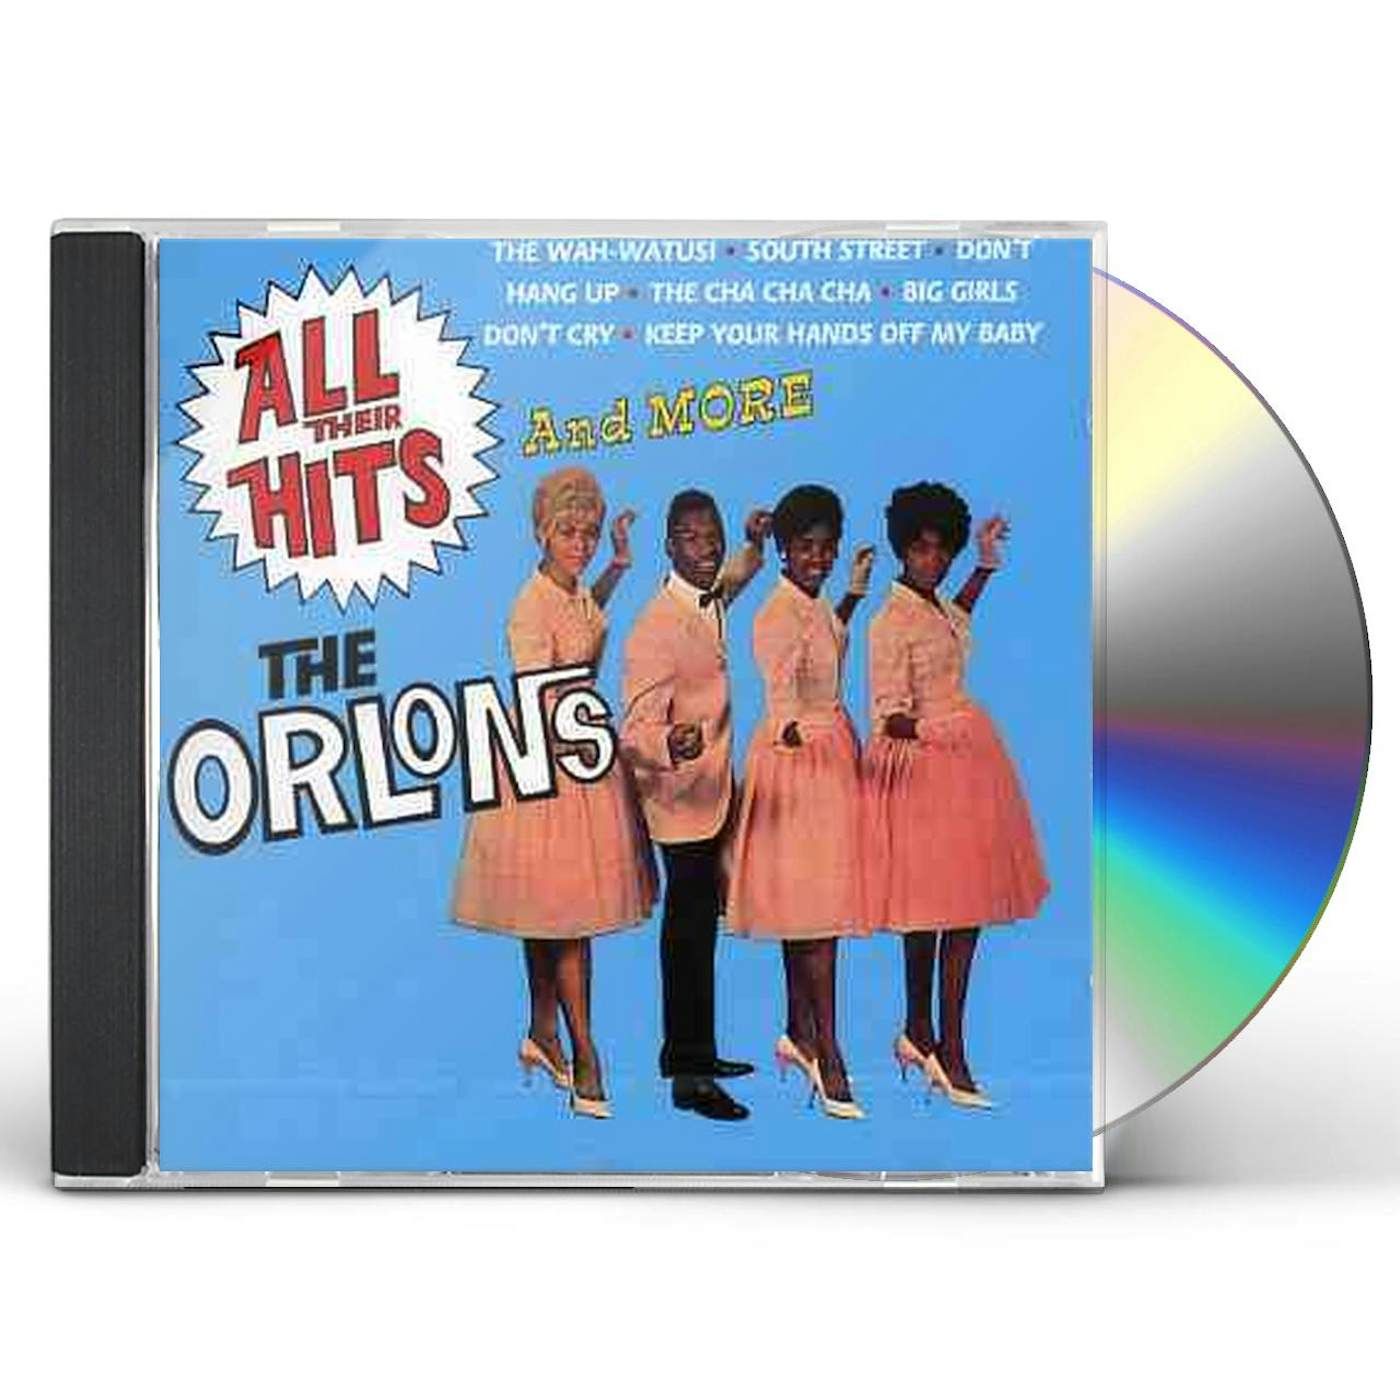 The Orlons ALL THEIR HITS AND MORE: 32 CUTS CD